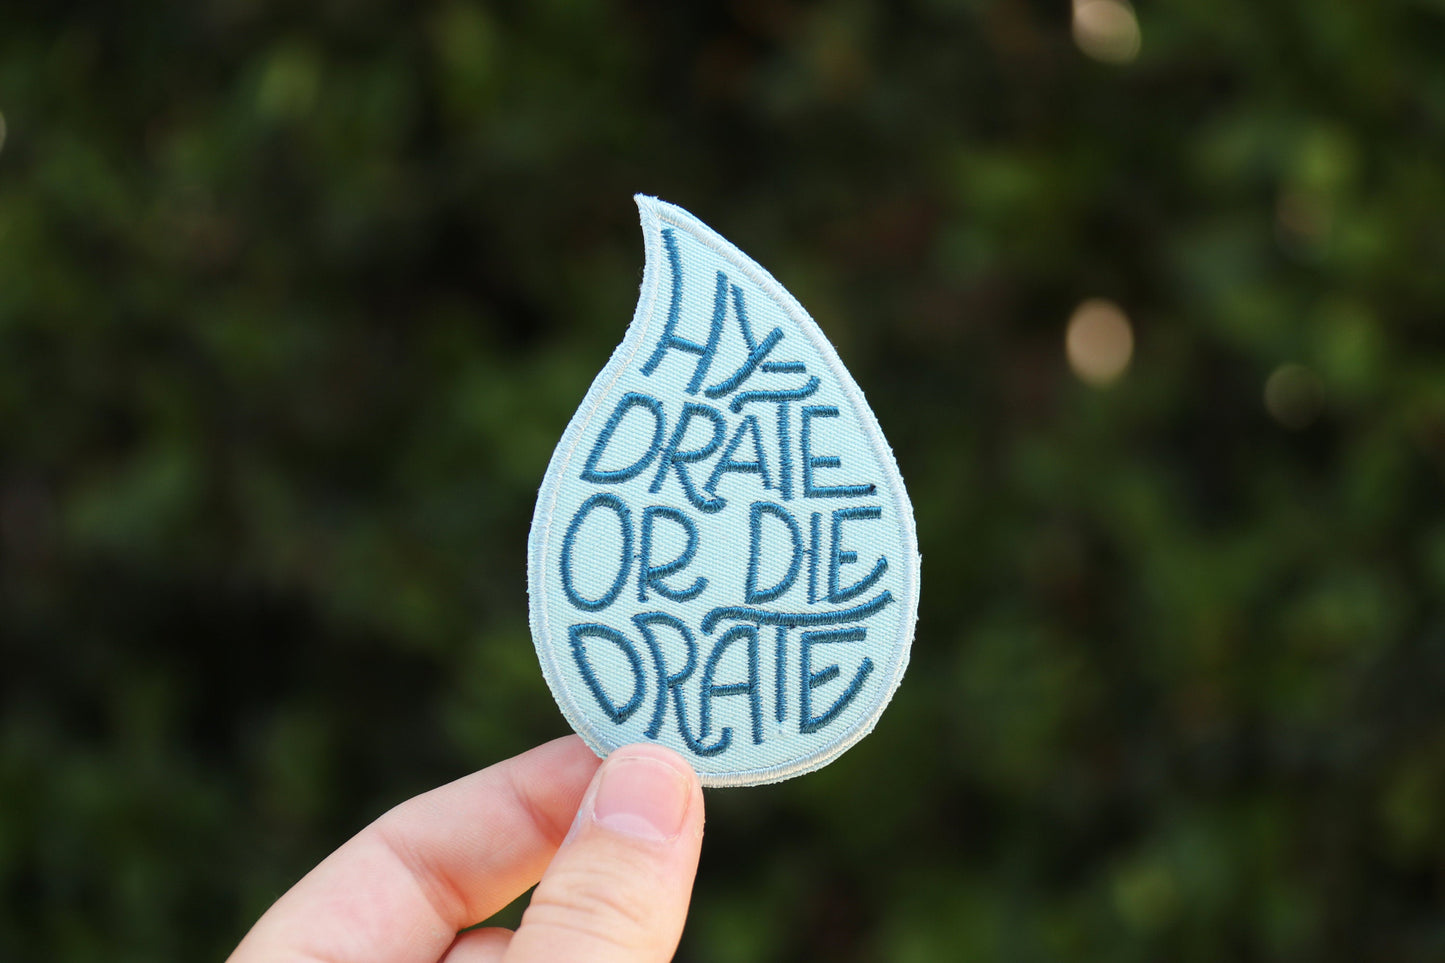 Hydrate or Die-drate Patch